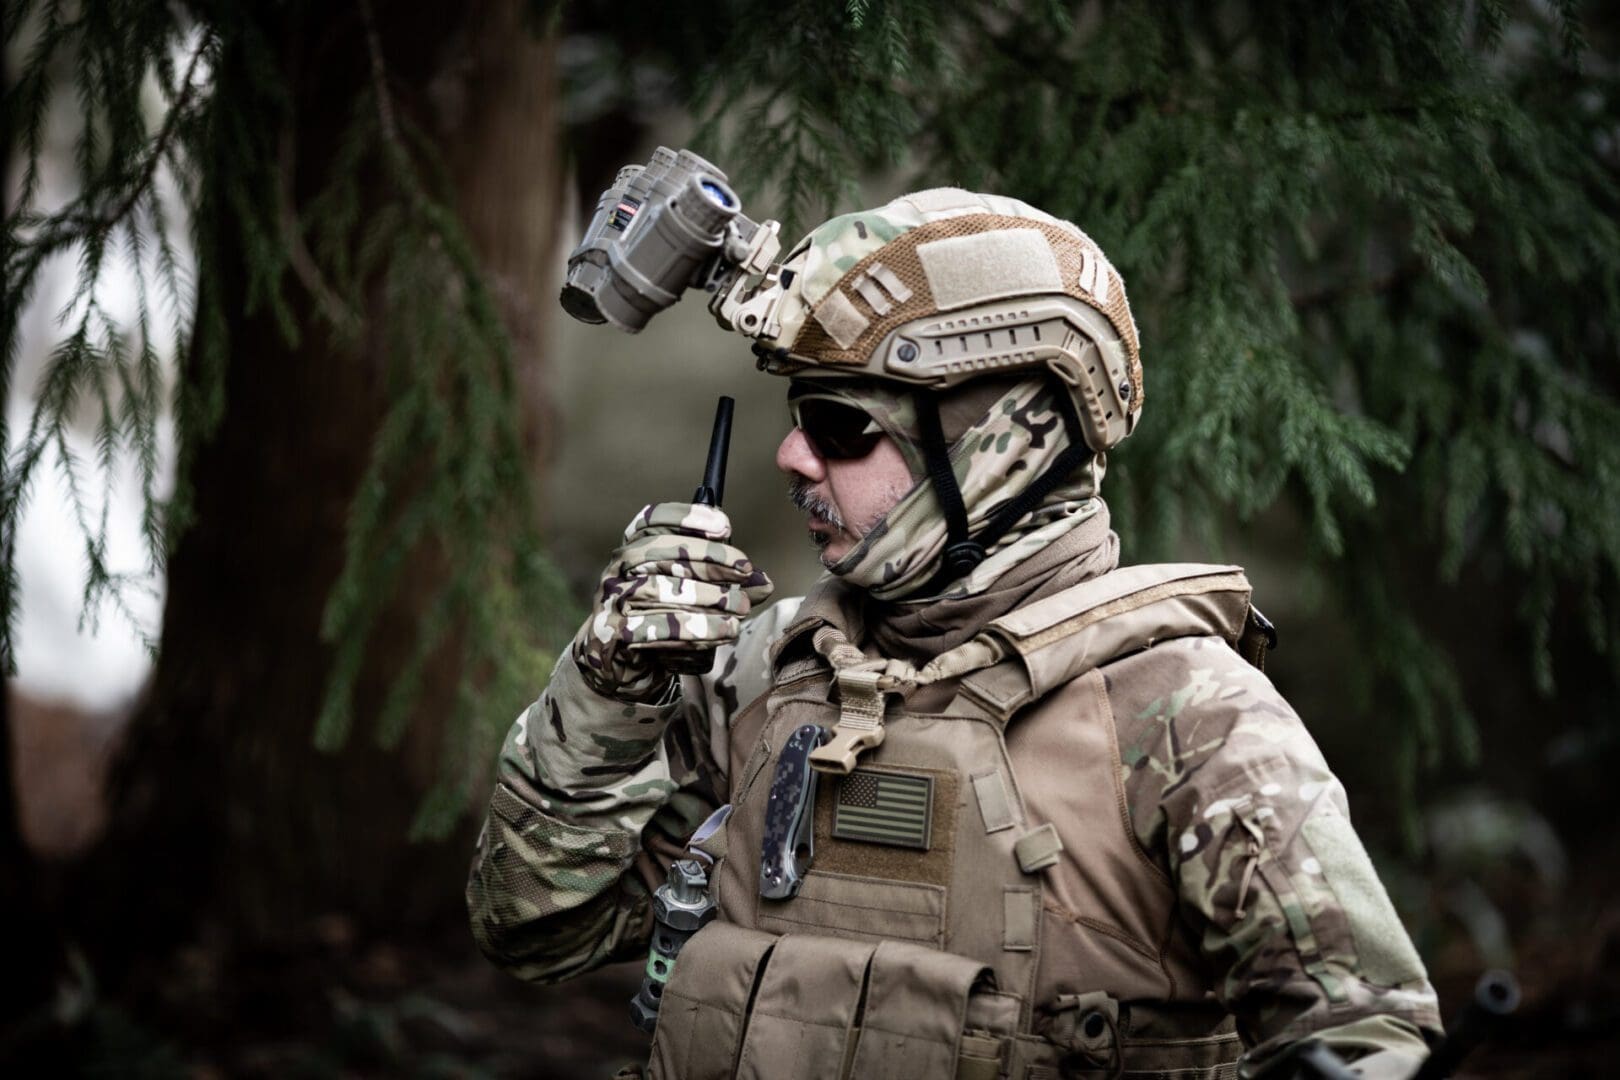 A tactical Military special forces member talking on a walkie talkie in a forest.